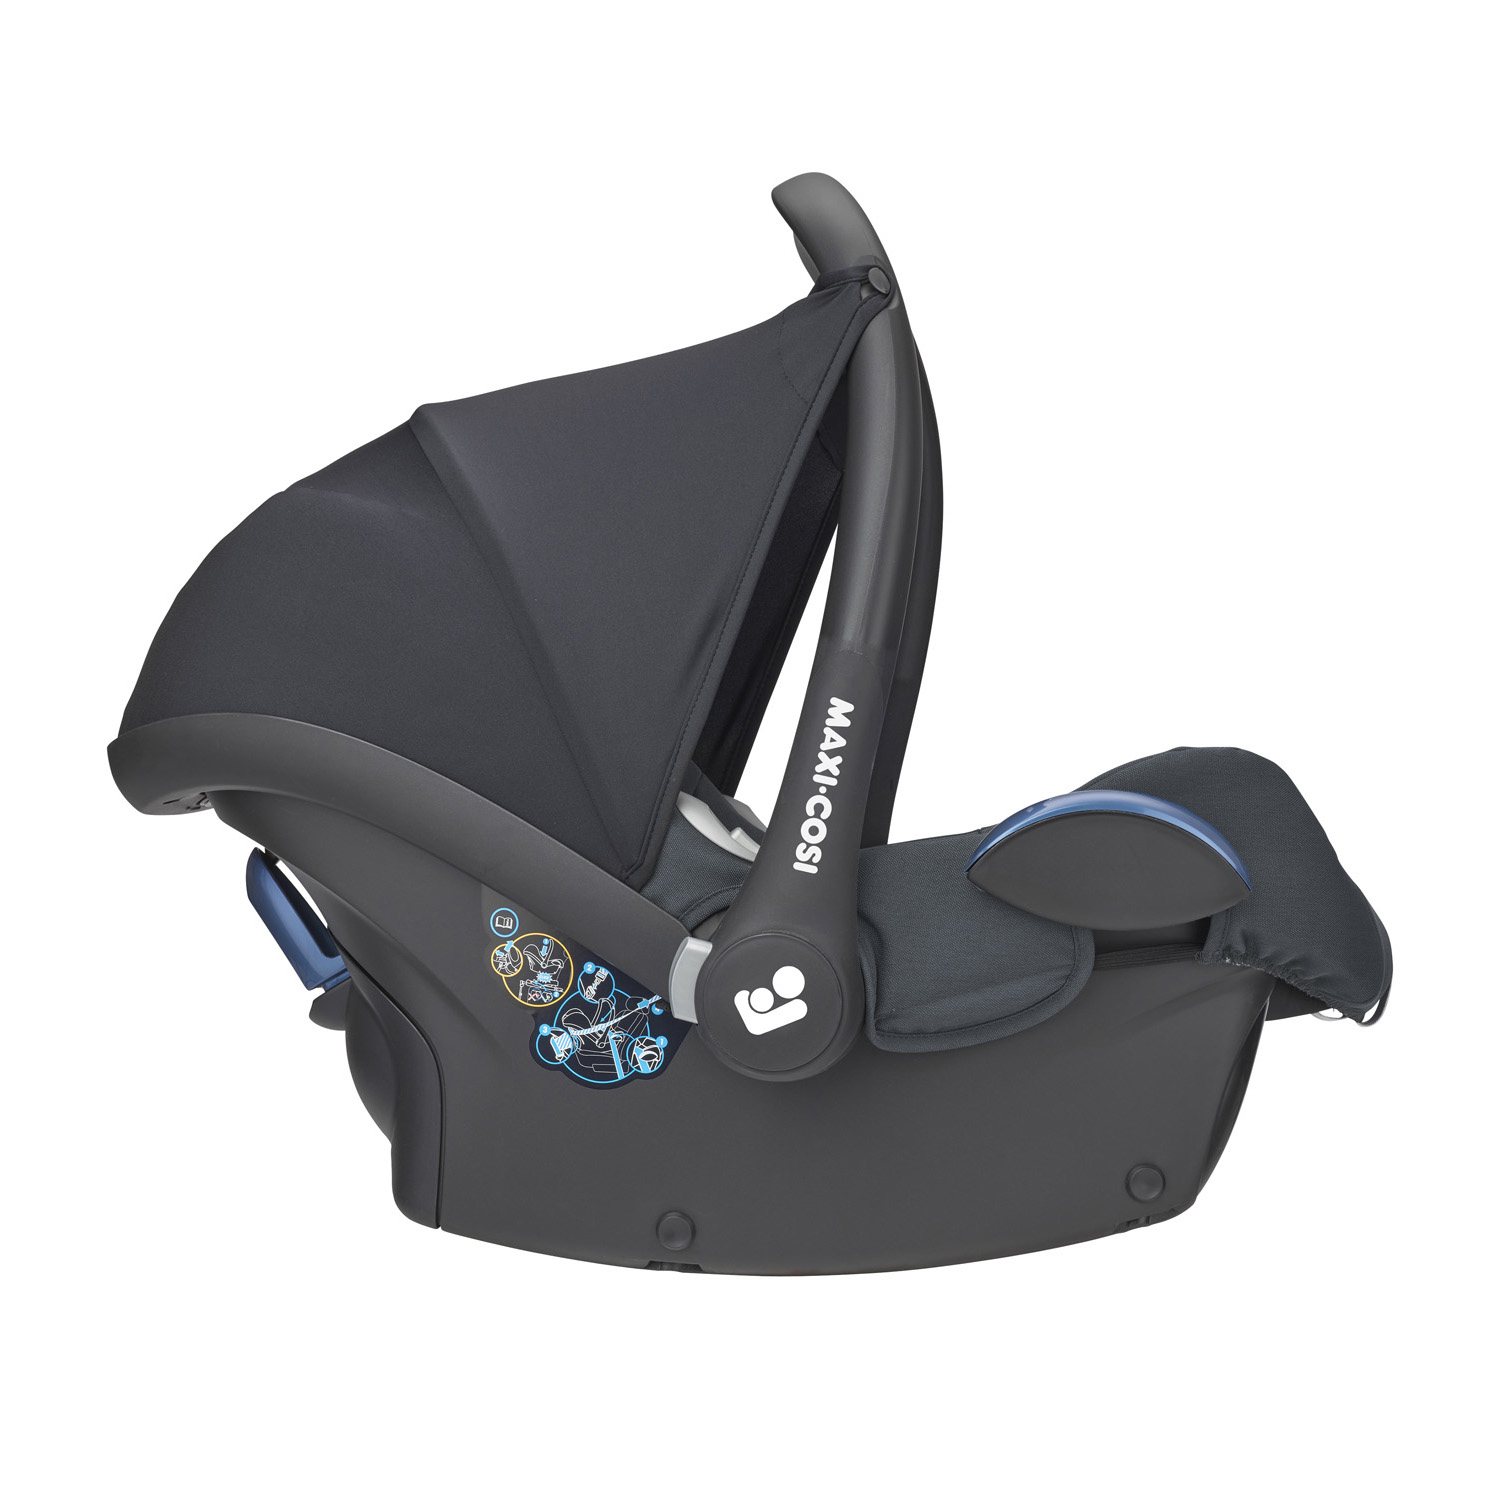 maxi cosi baby carrier